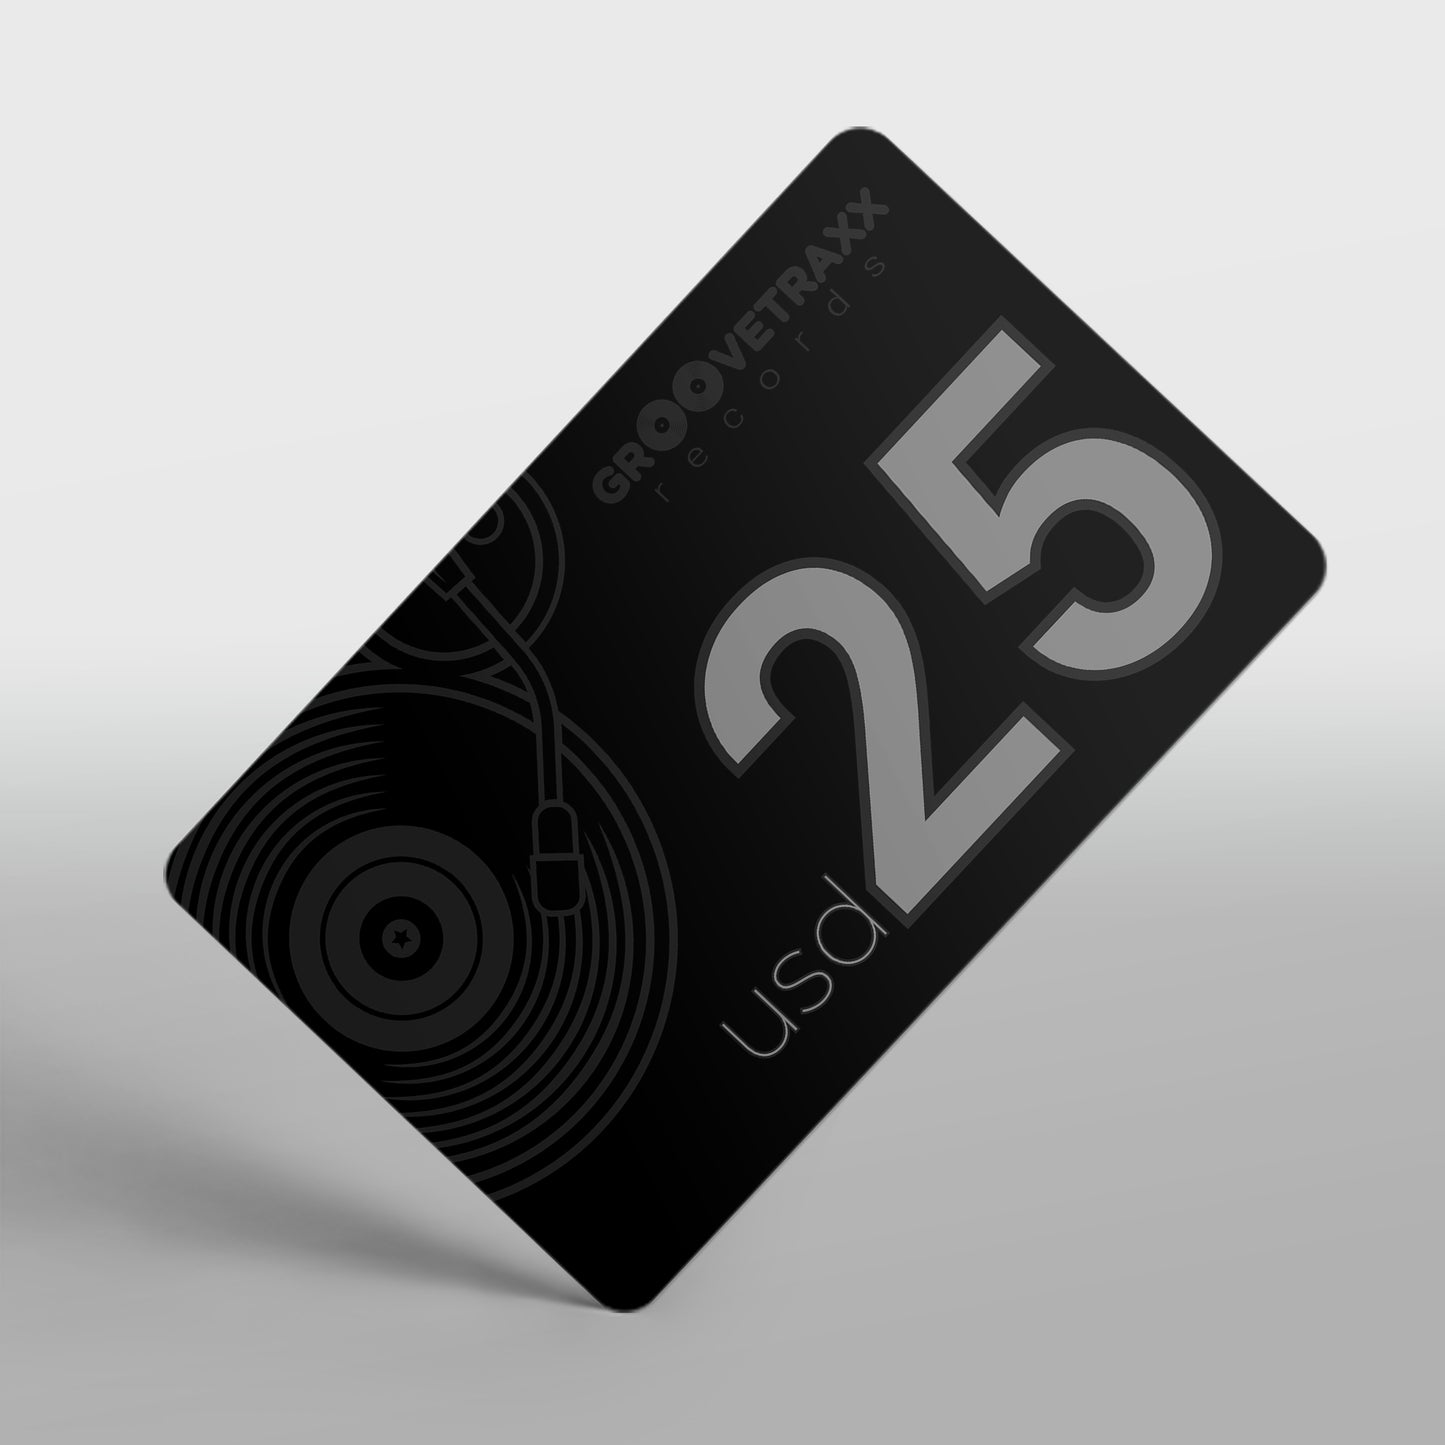 TEST PRODUCT: USD GIFT CARD